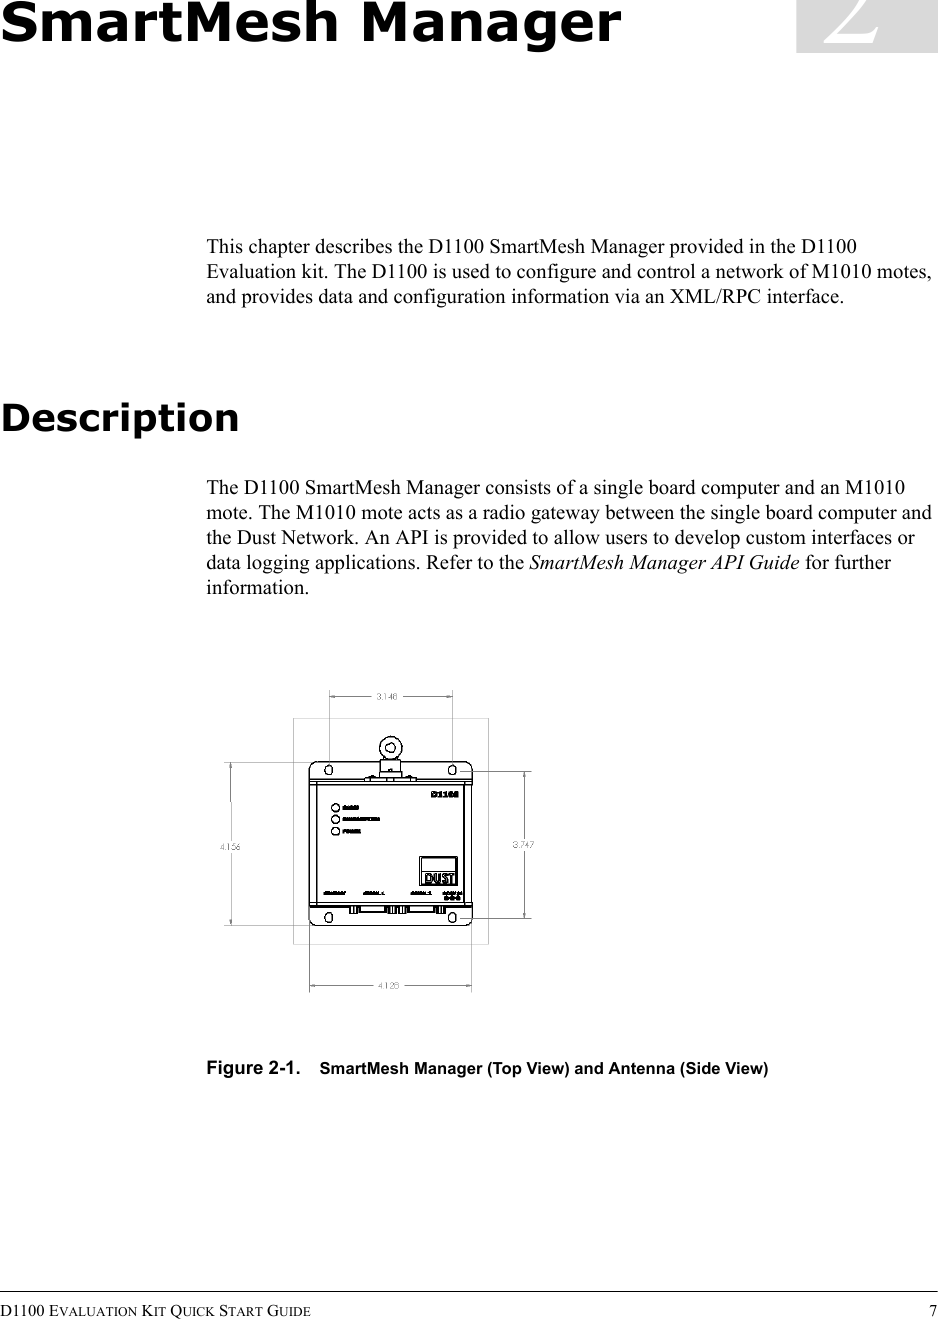 D1100 EVALUATION KIT QUICK START GUIDE 72SmartMesh ManagerThis chapter describes the D1100 SmartMesh Manager provided in the D1100 Evaluation kit. The D1100 is used to configure and control a network of M1010 motes, and provides data and configuration information via an XML/RPC interface.DescriptionThe D1100 SmartMesh Manager consists of a single board computer and an M1010 mote. The M1010 mote acts as a radio gateway between the single board computer and the Dust Network. An API is provided to allow users to develop custom interfaces or data logging applications. Refer to the SmartMesh Manager API Guide for further information.Figure 2-1. SmartMesh Manager (Top View) and Antenna (Side View)